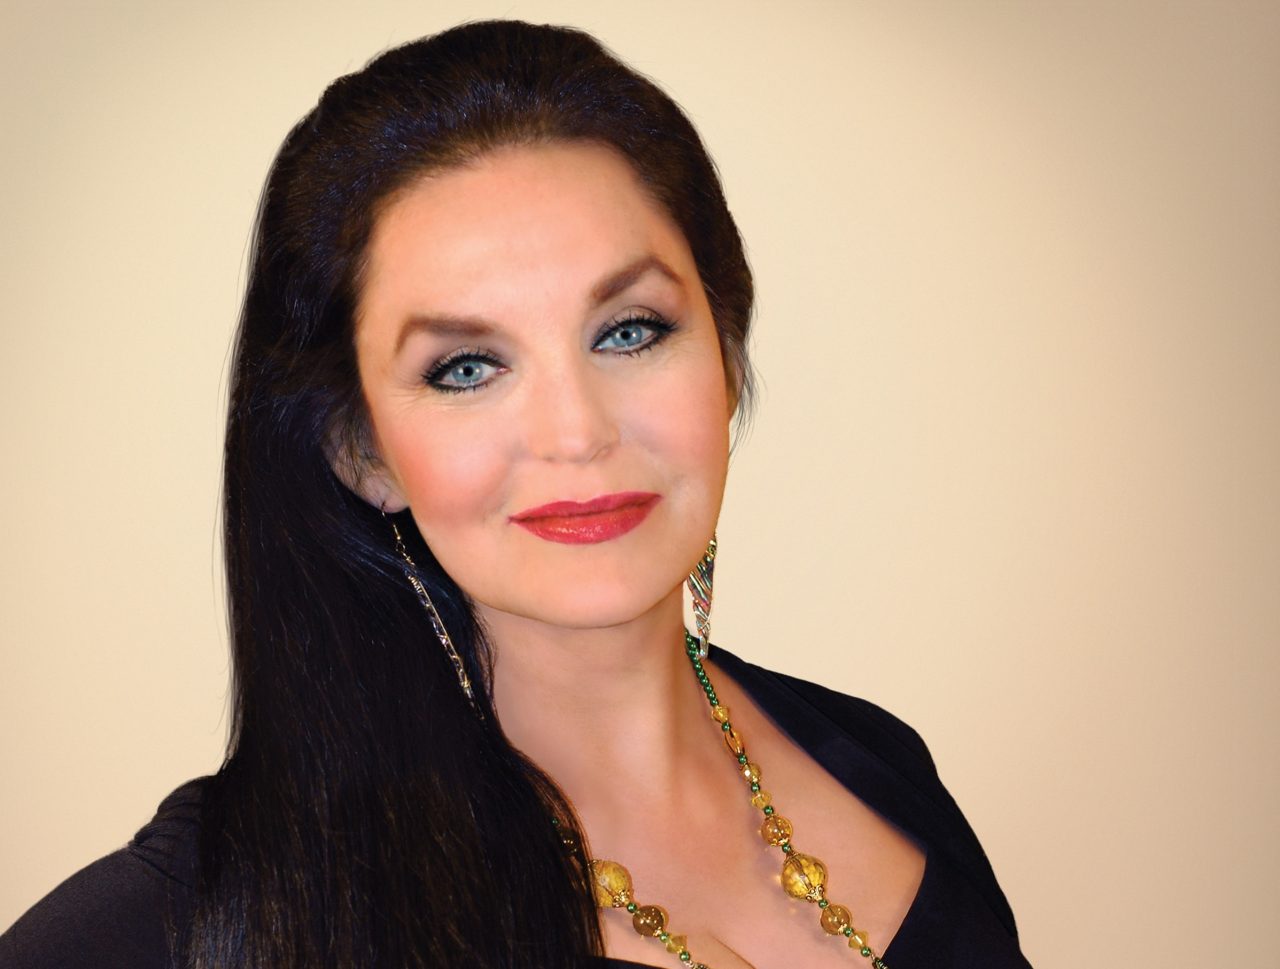 Crystal Gayle Returns with New Album of Classic Songs